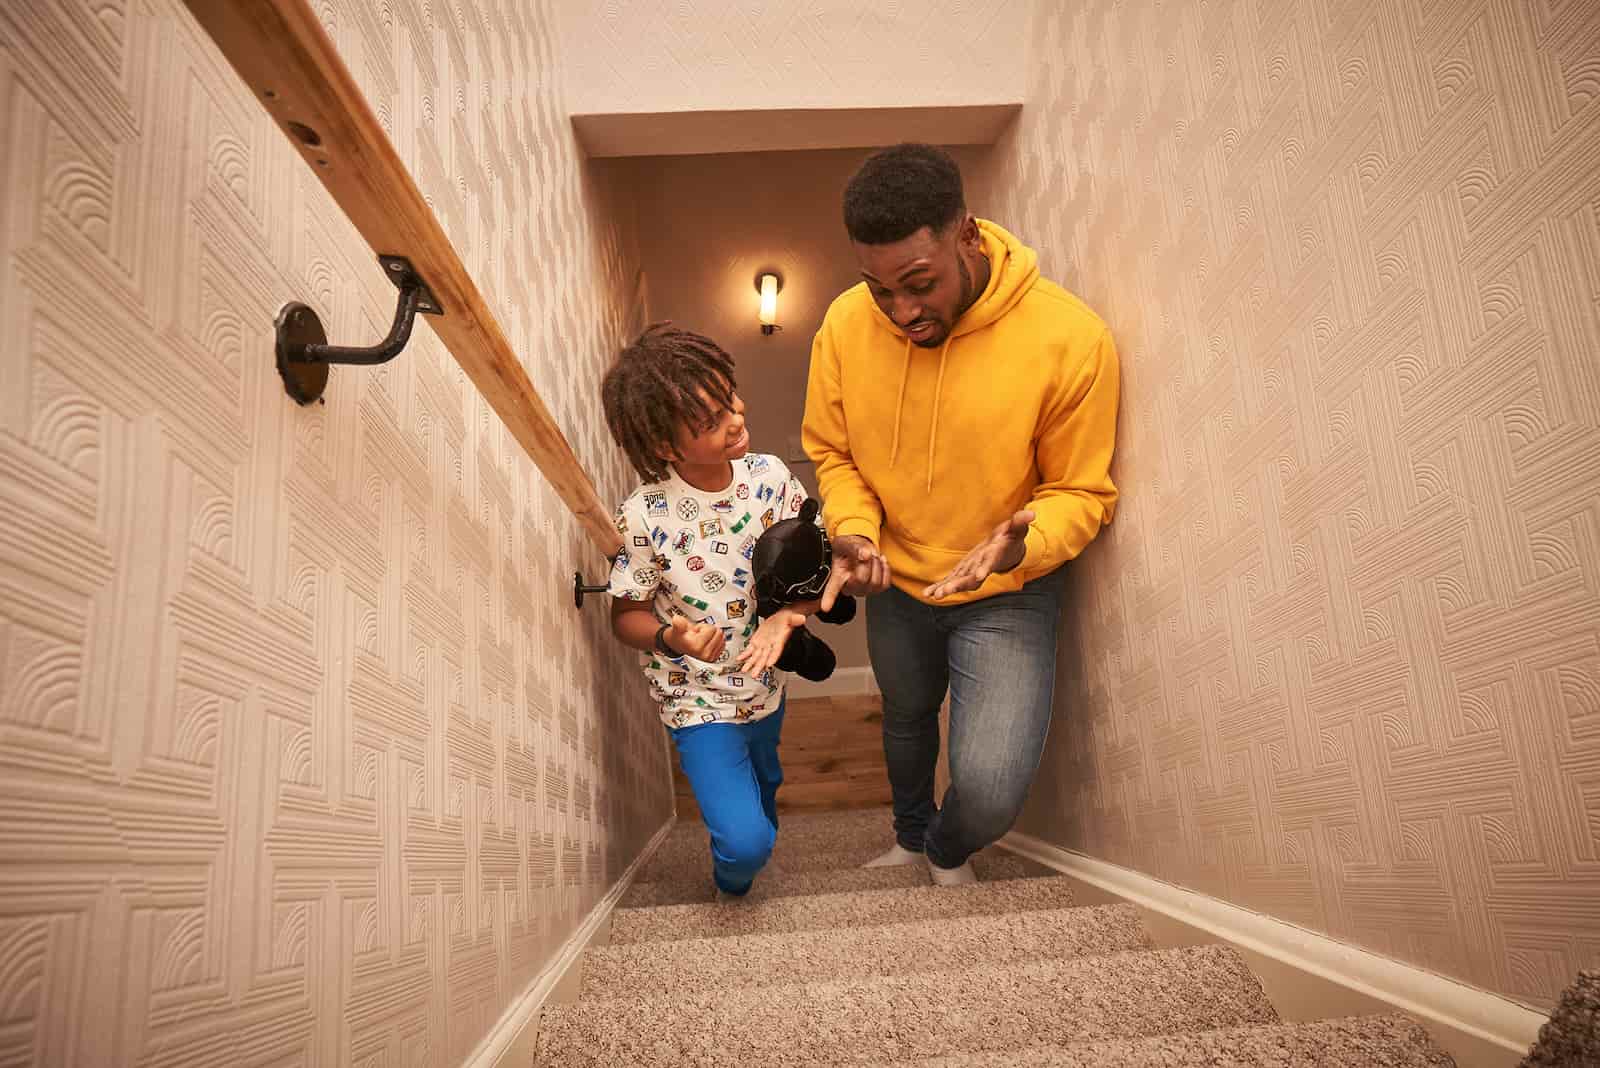 Image of a dad and child walking up a set of stairs together.